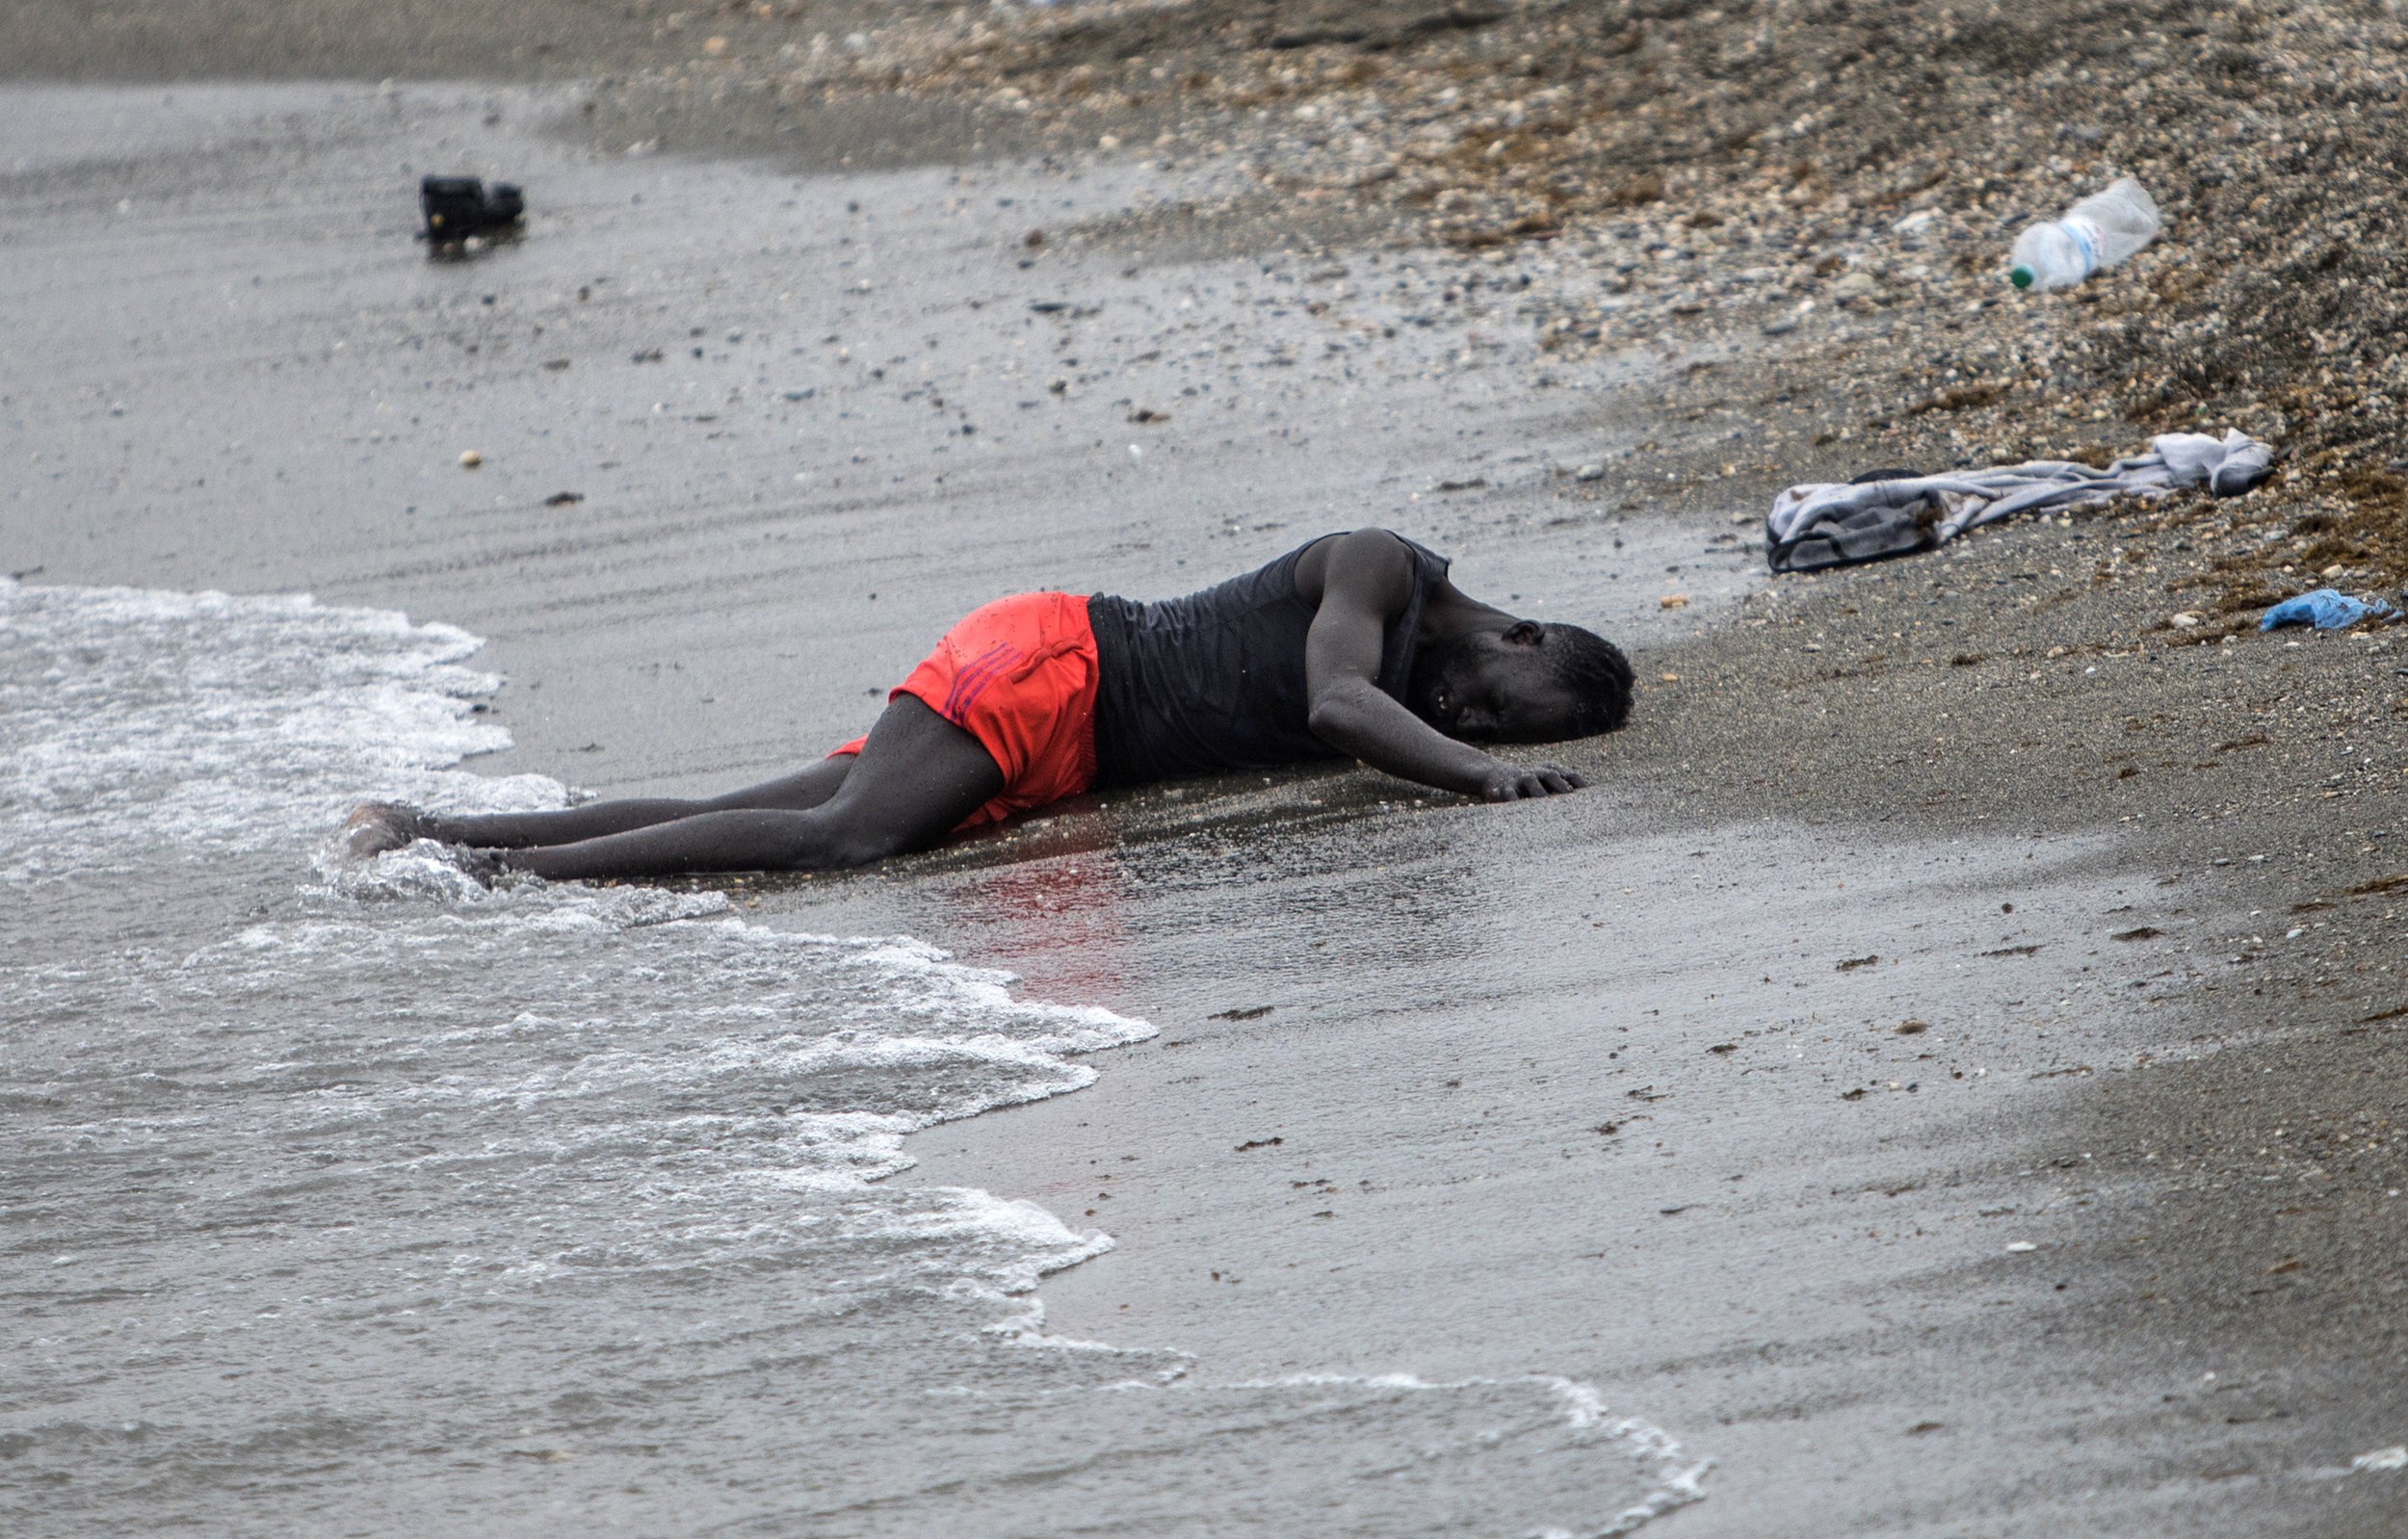  A man lies on the beach in the Spanish enclave of Ceuta in northern Africa after swimming there from Morocco on May 18, 2021. (AP Photo/Javier Fergo) 